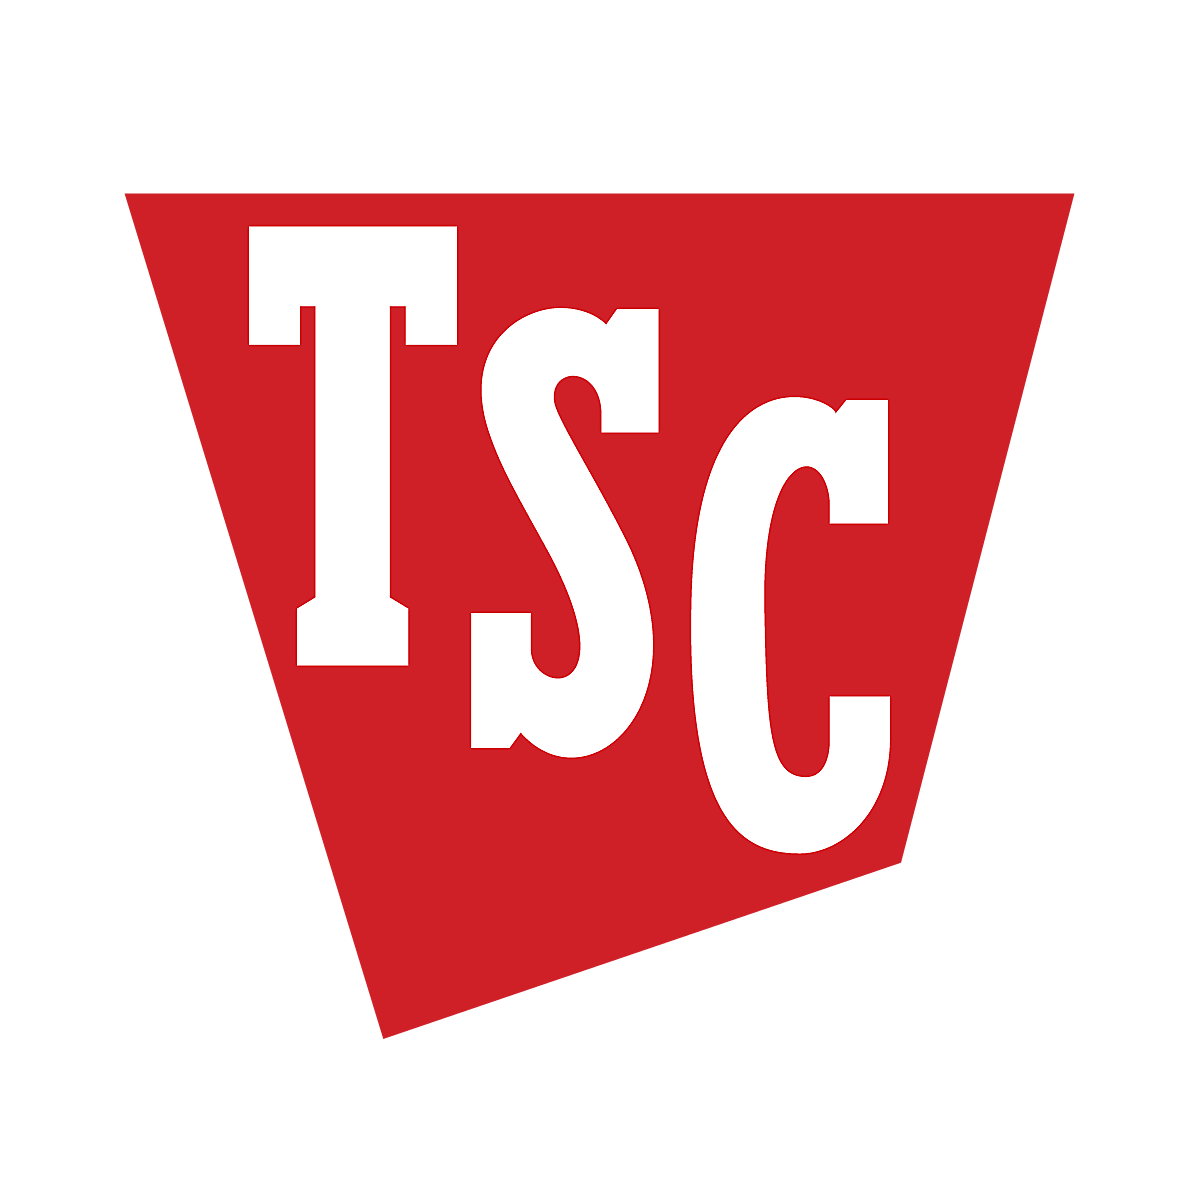 Georgia Red and Blue Business Logo - For Life Out Here. Tractor Supply Co